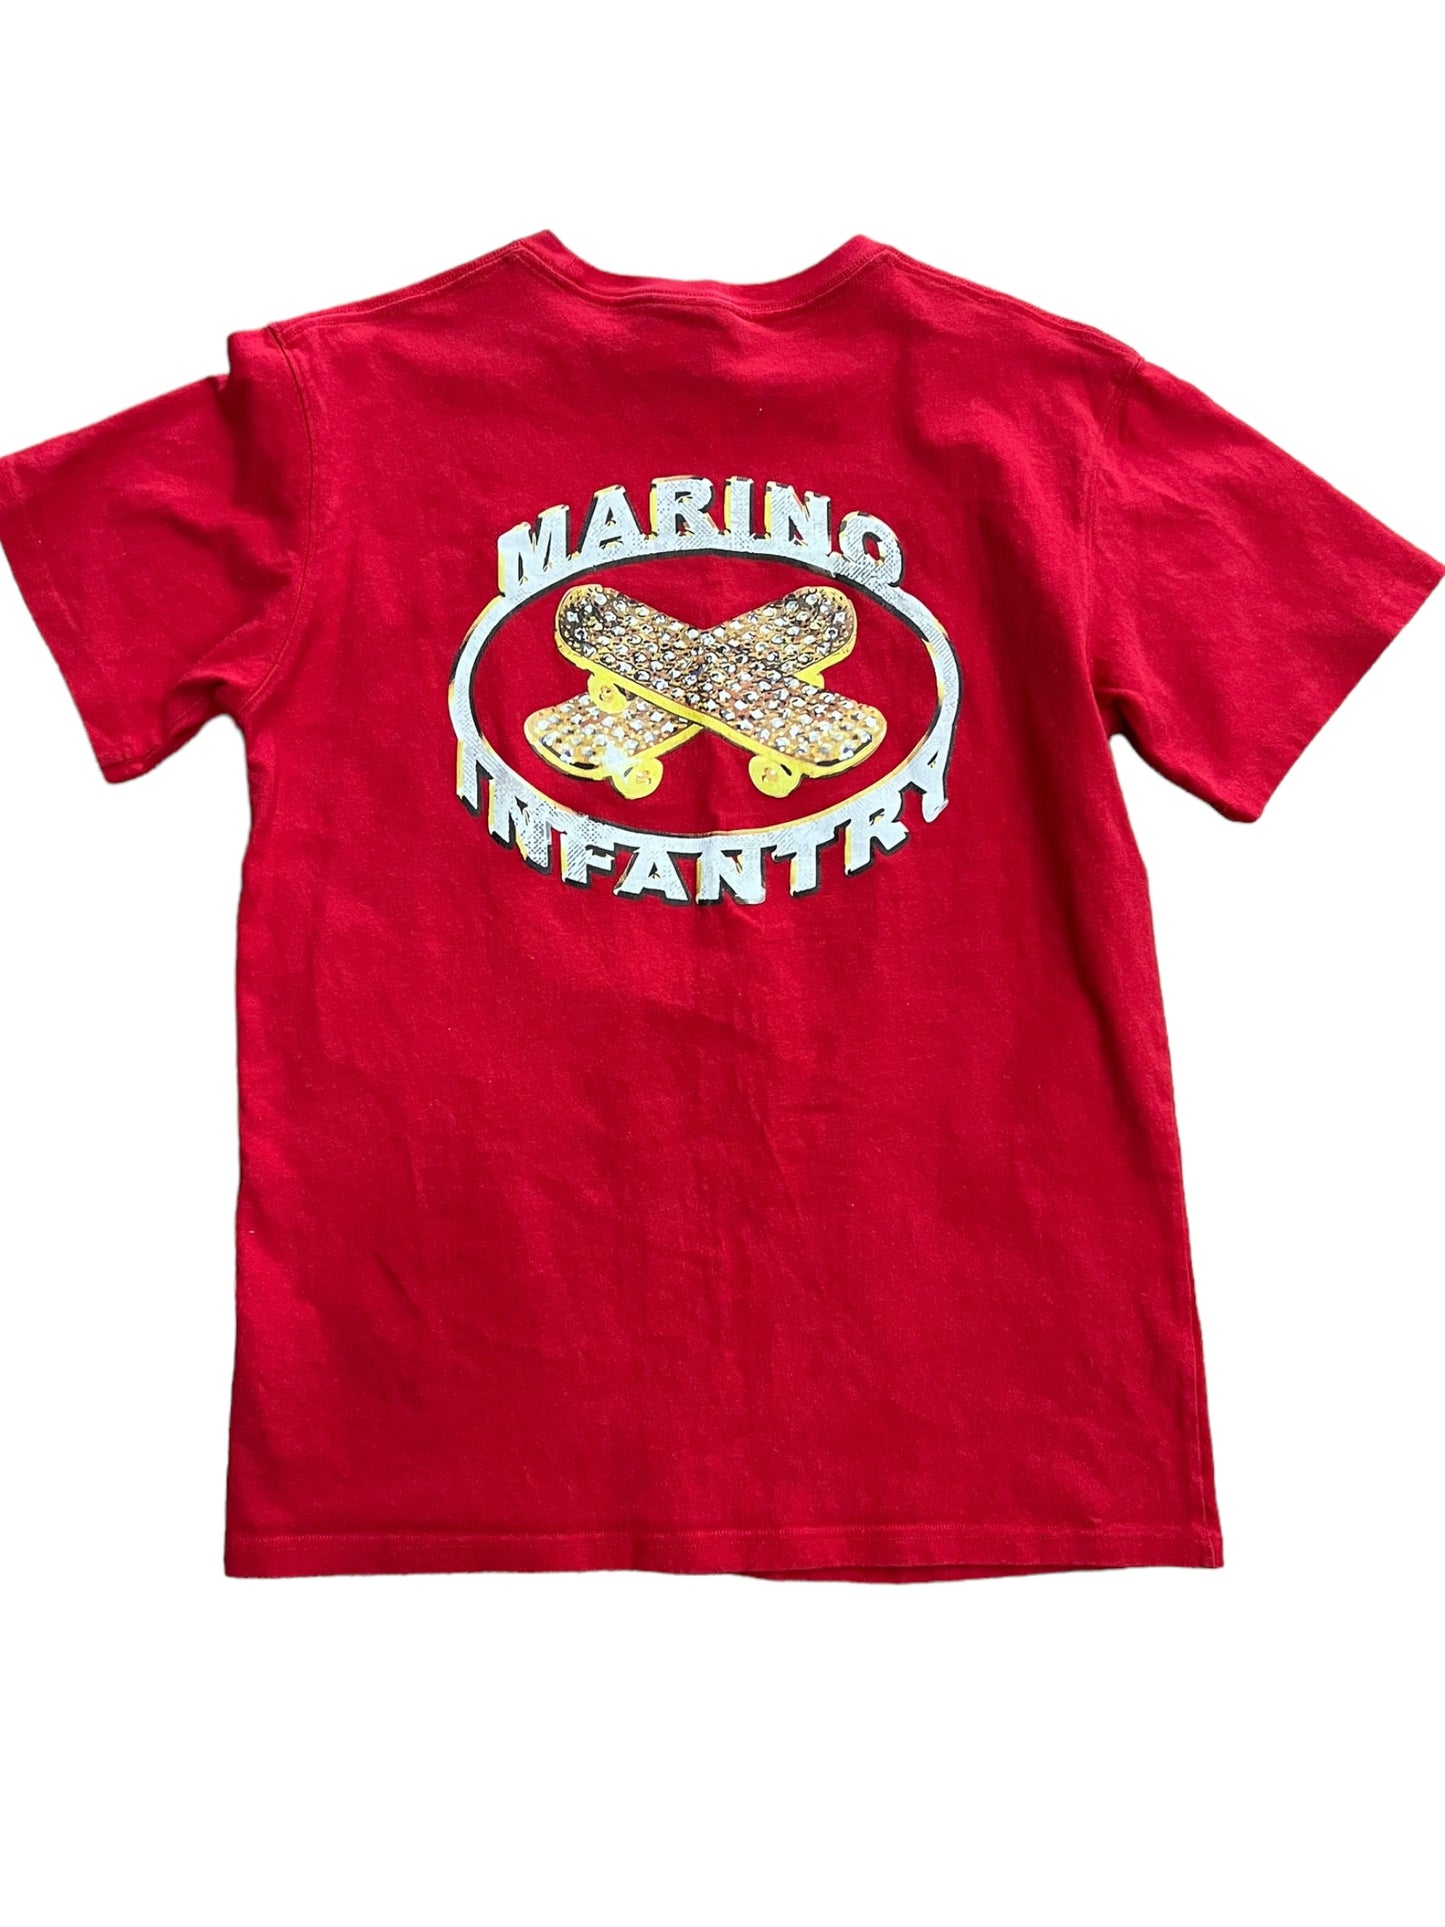 Marino Infantry X Needles pre-owned red tee size 4